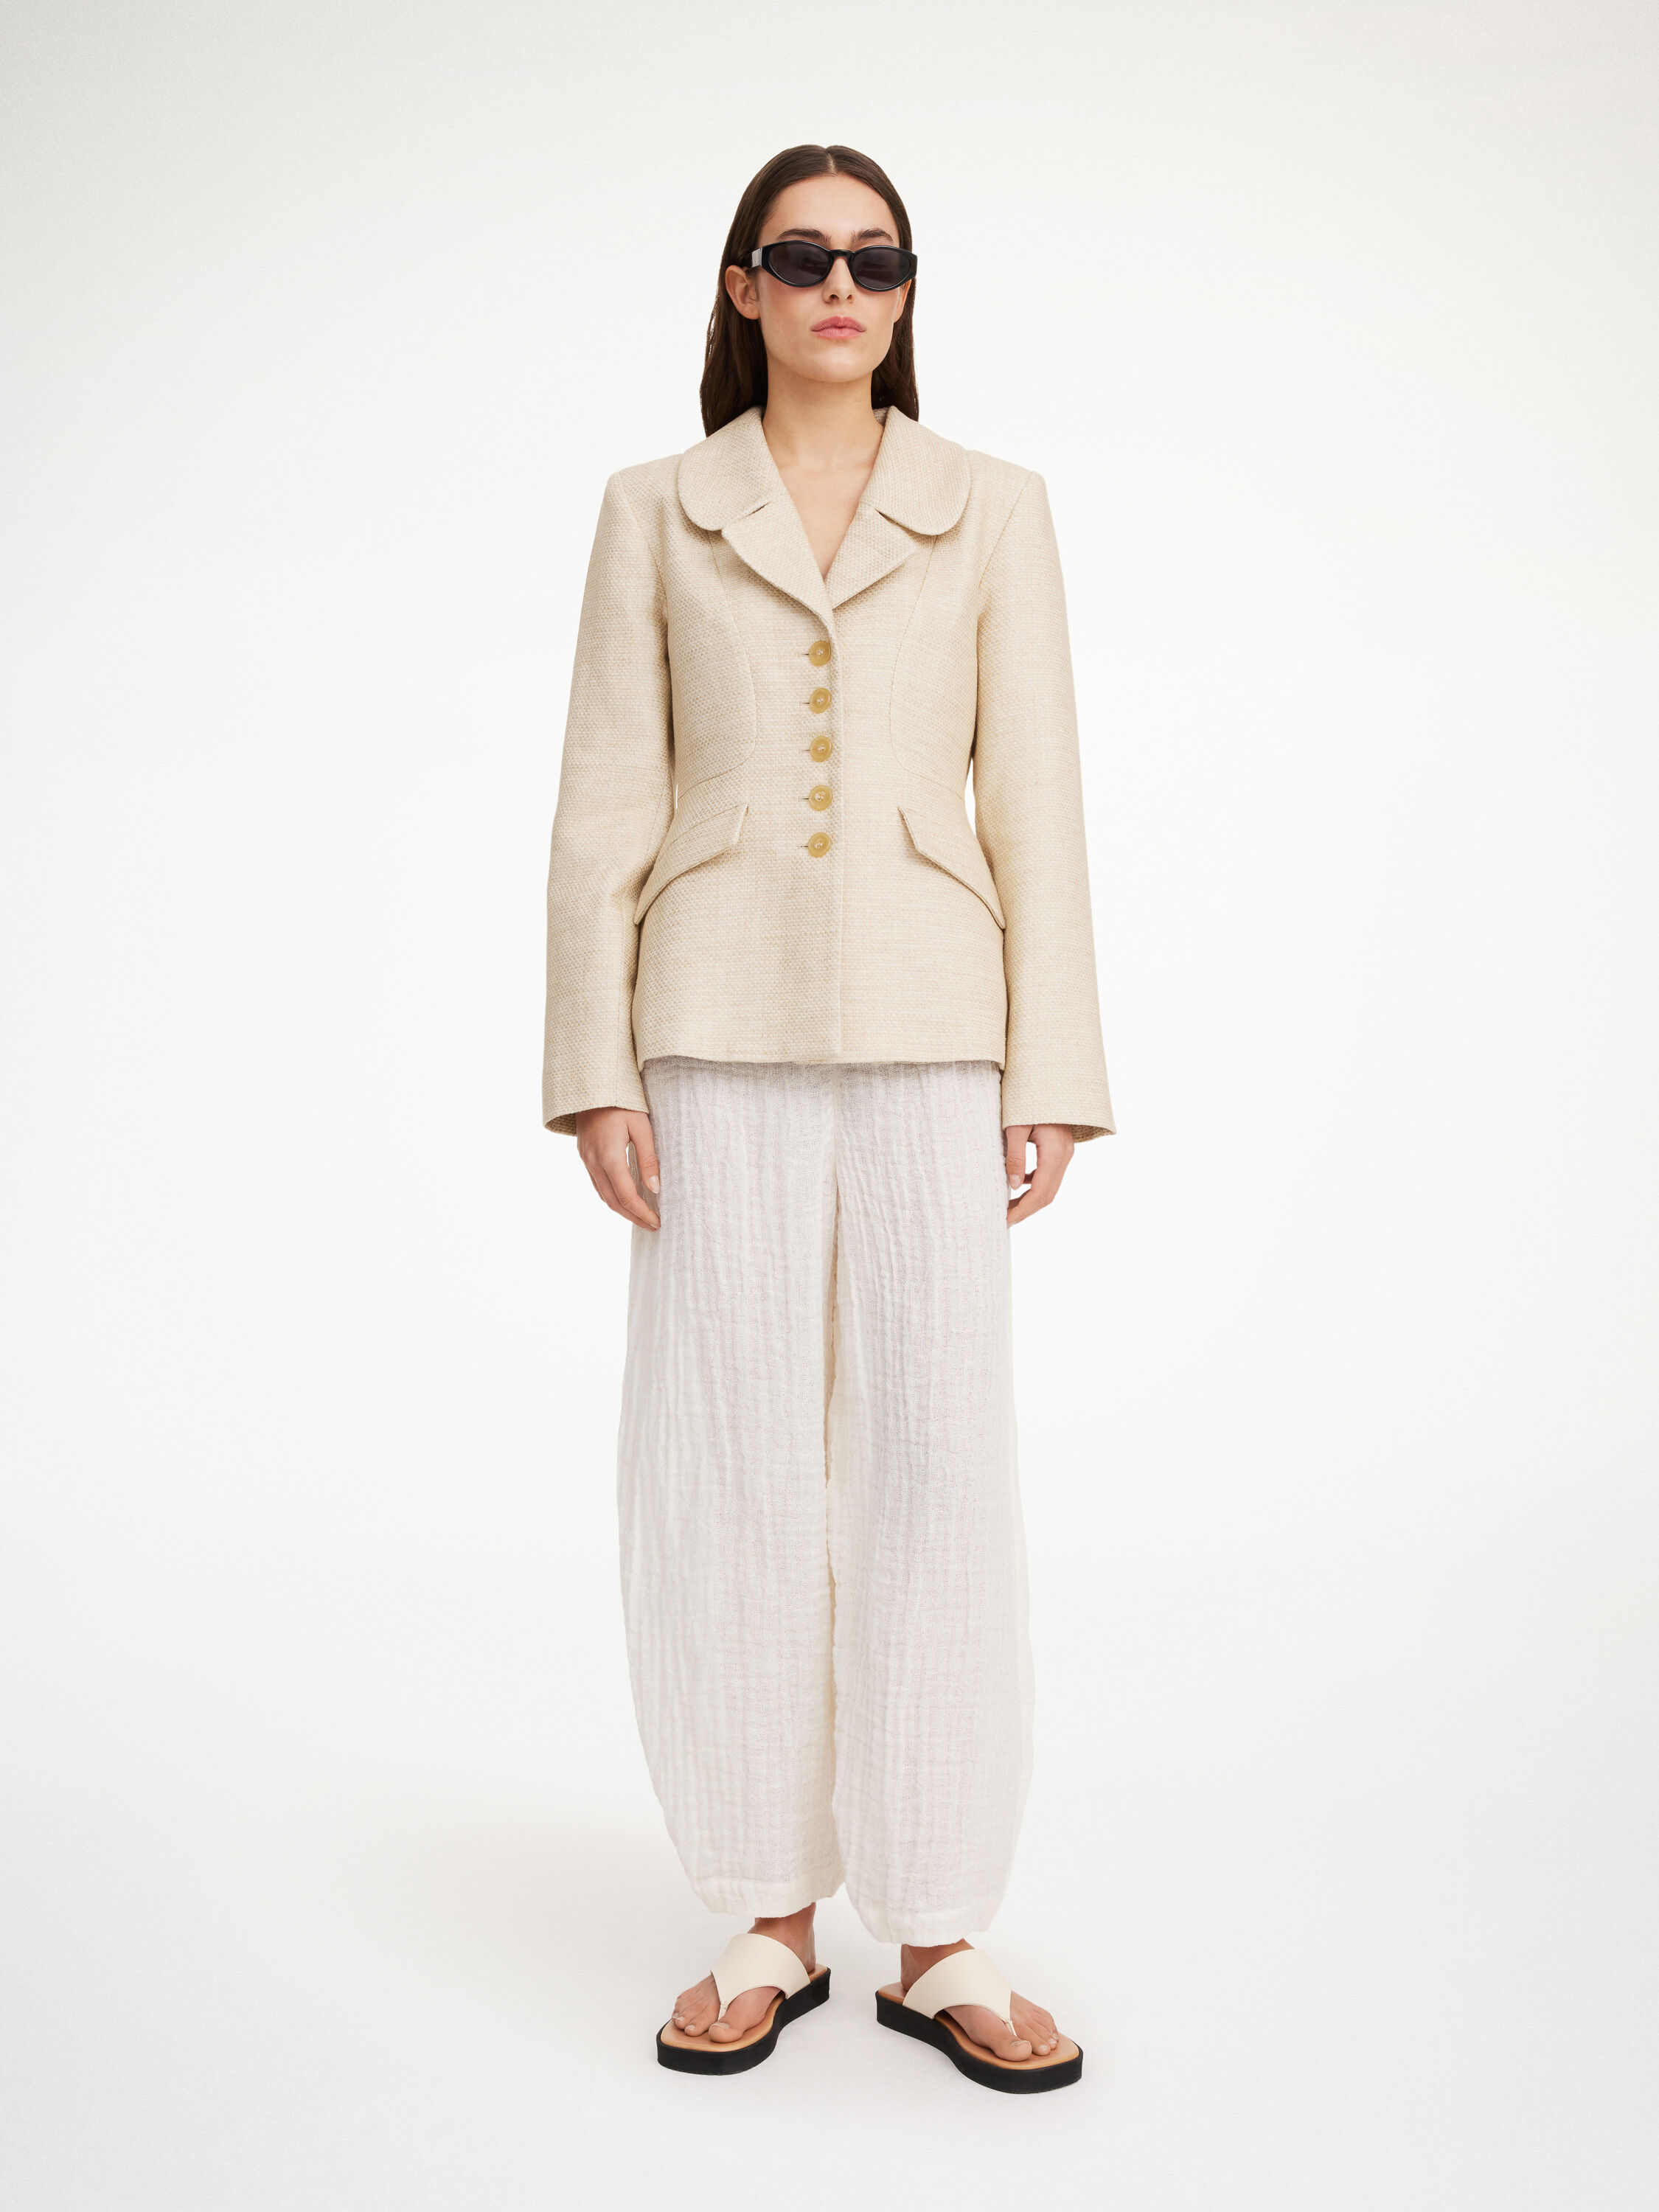 Blazers | Find all styles here | By Malene Birger